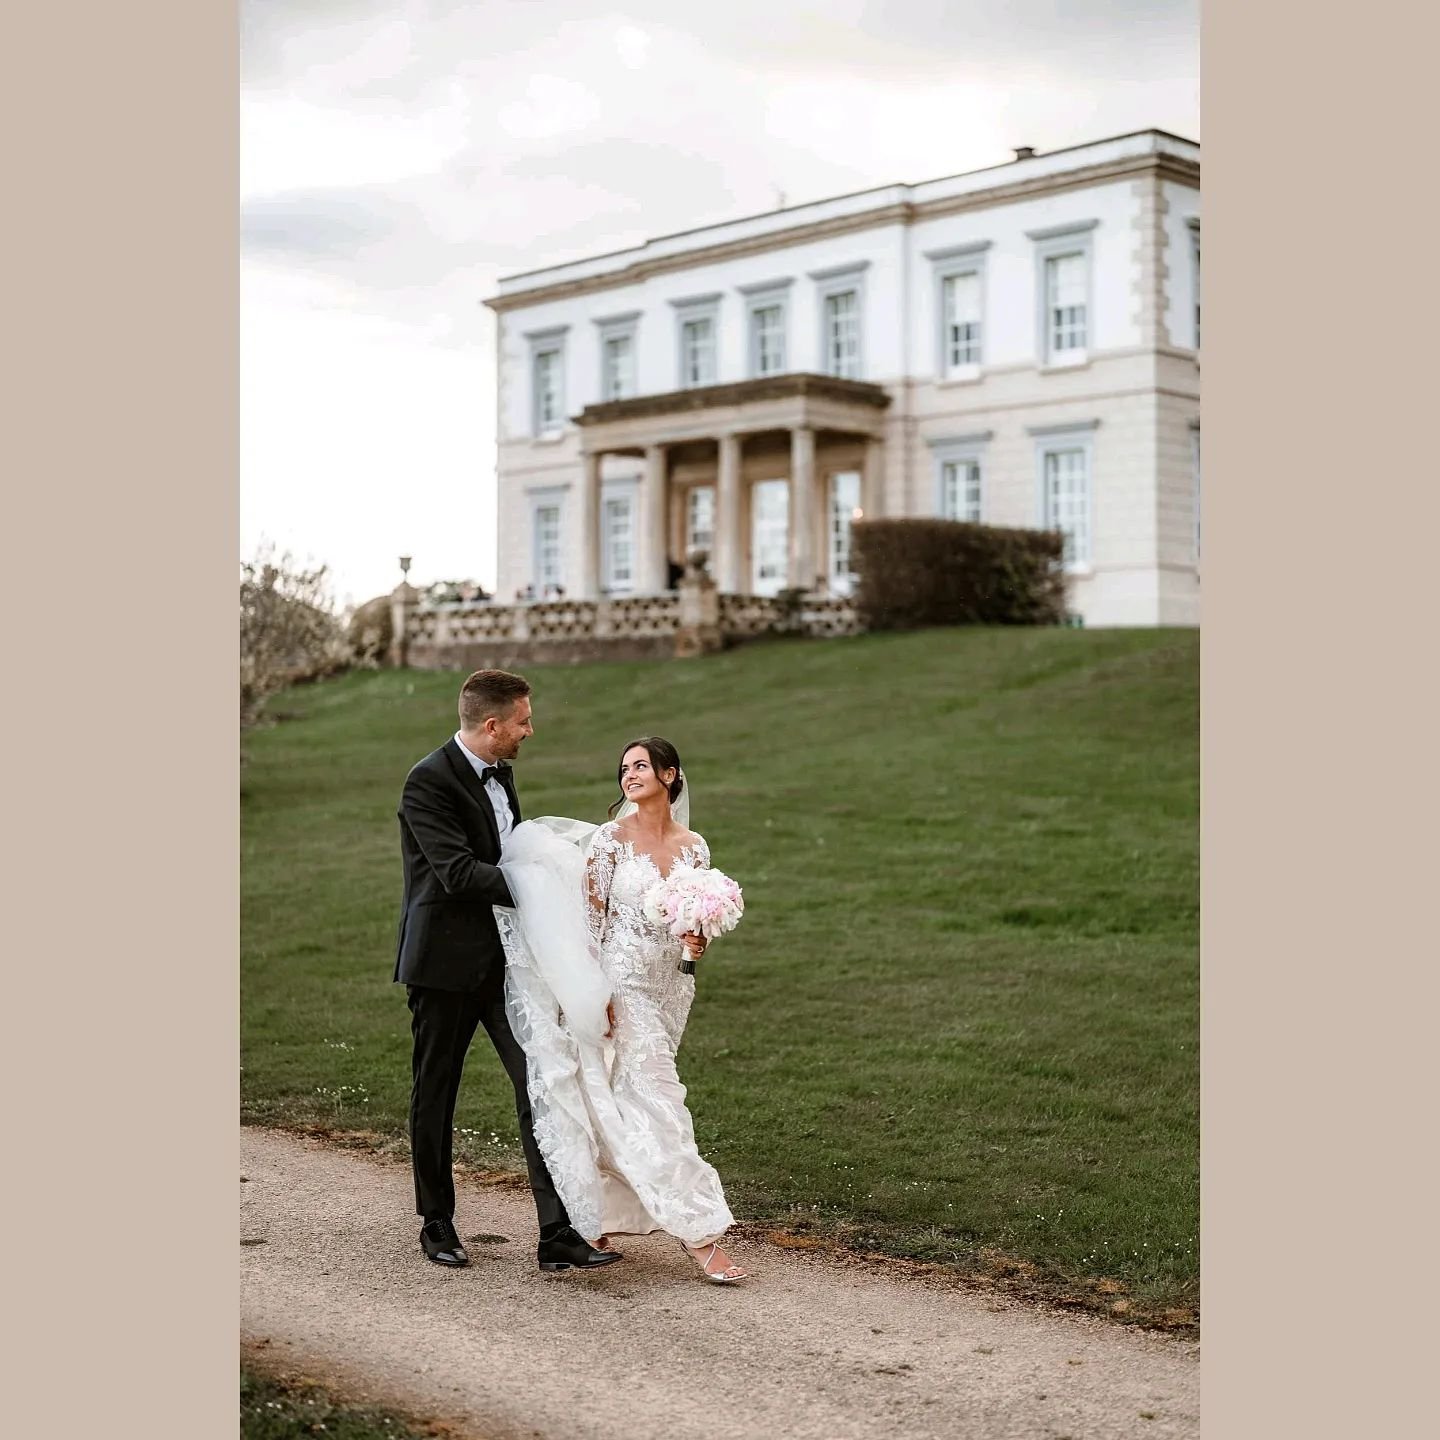 A few frames from yesterday's wedding with the stunning Victoria and Zac.
@victoriadrewett

@buxtedparkhotel
@hair_by_duboux
@bridebeautifulmakeup
@flutterbyevents
@milimilicolchester